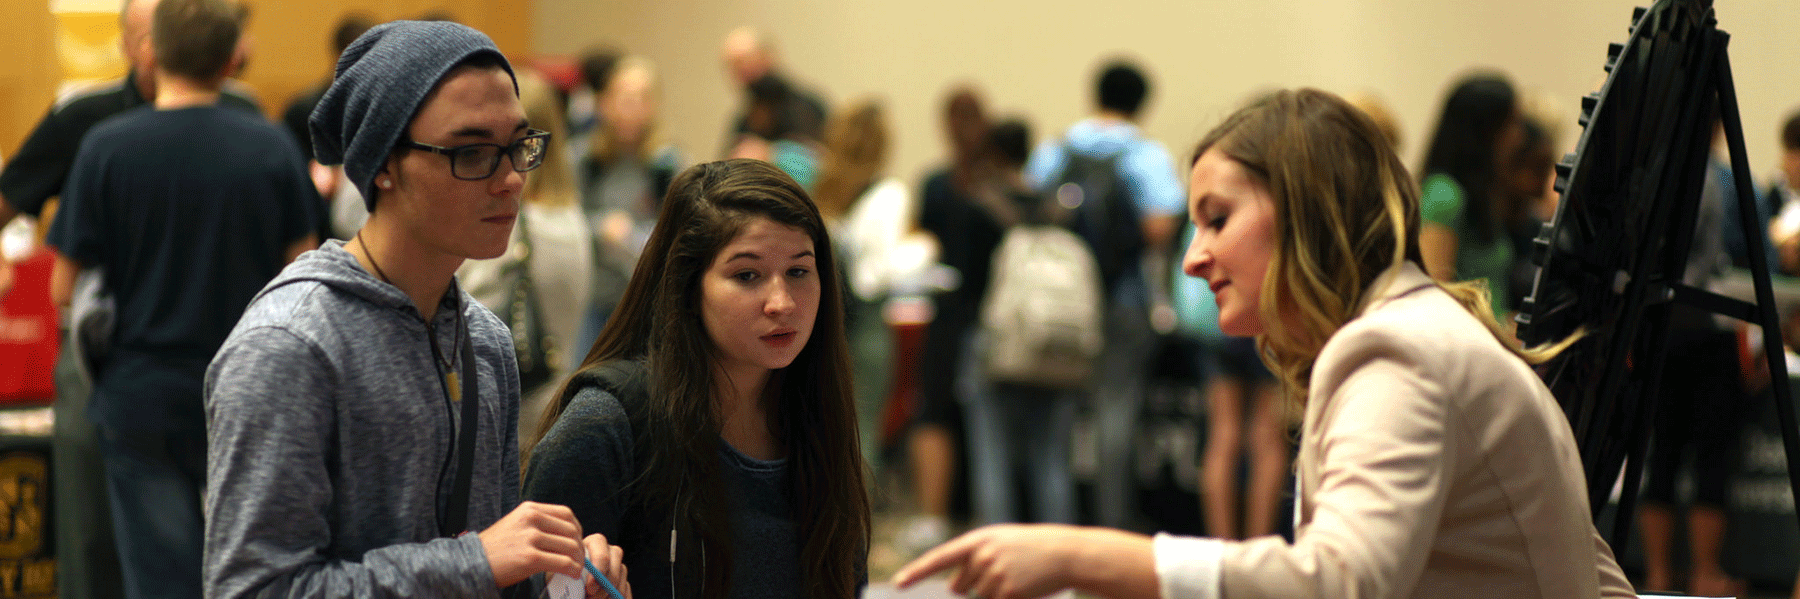 A photo of students participating in a career event on campus.